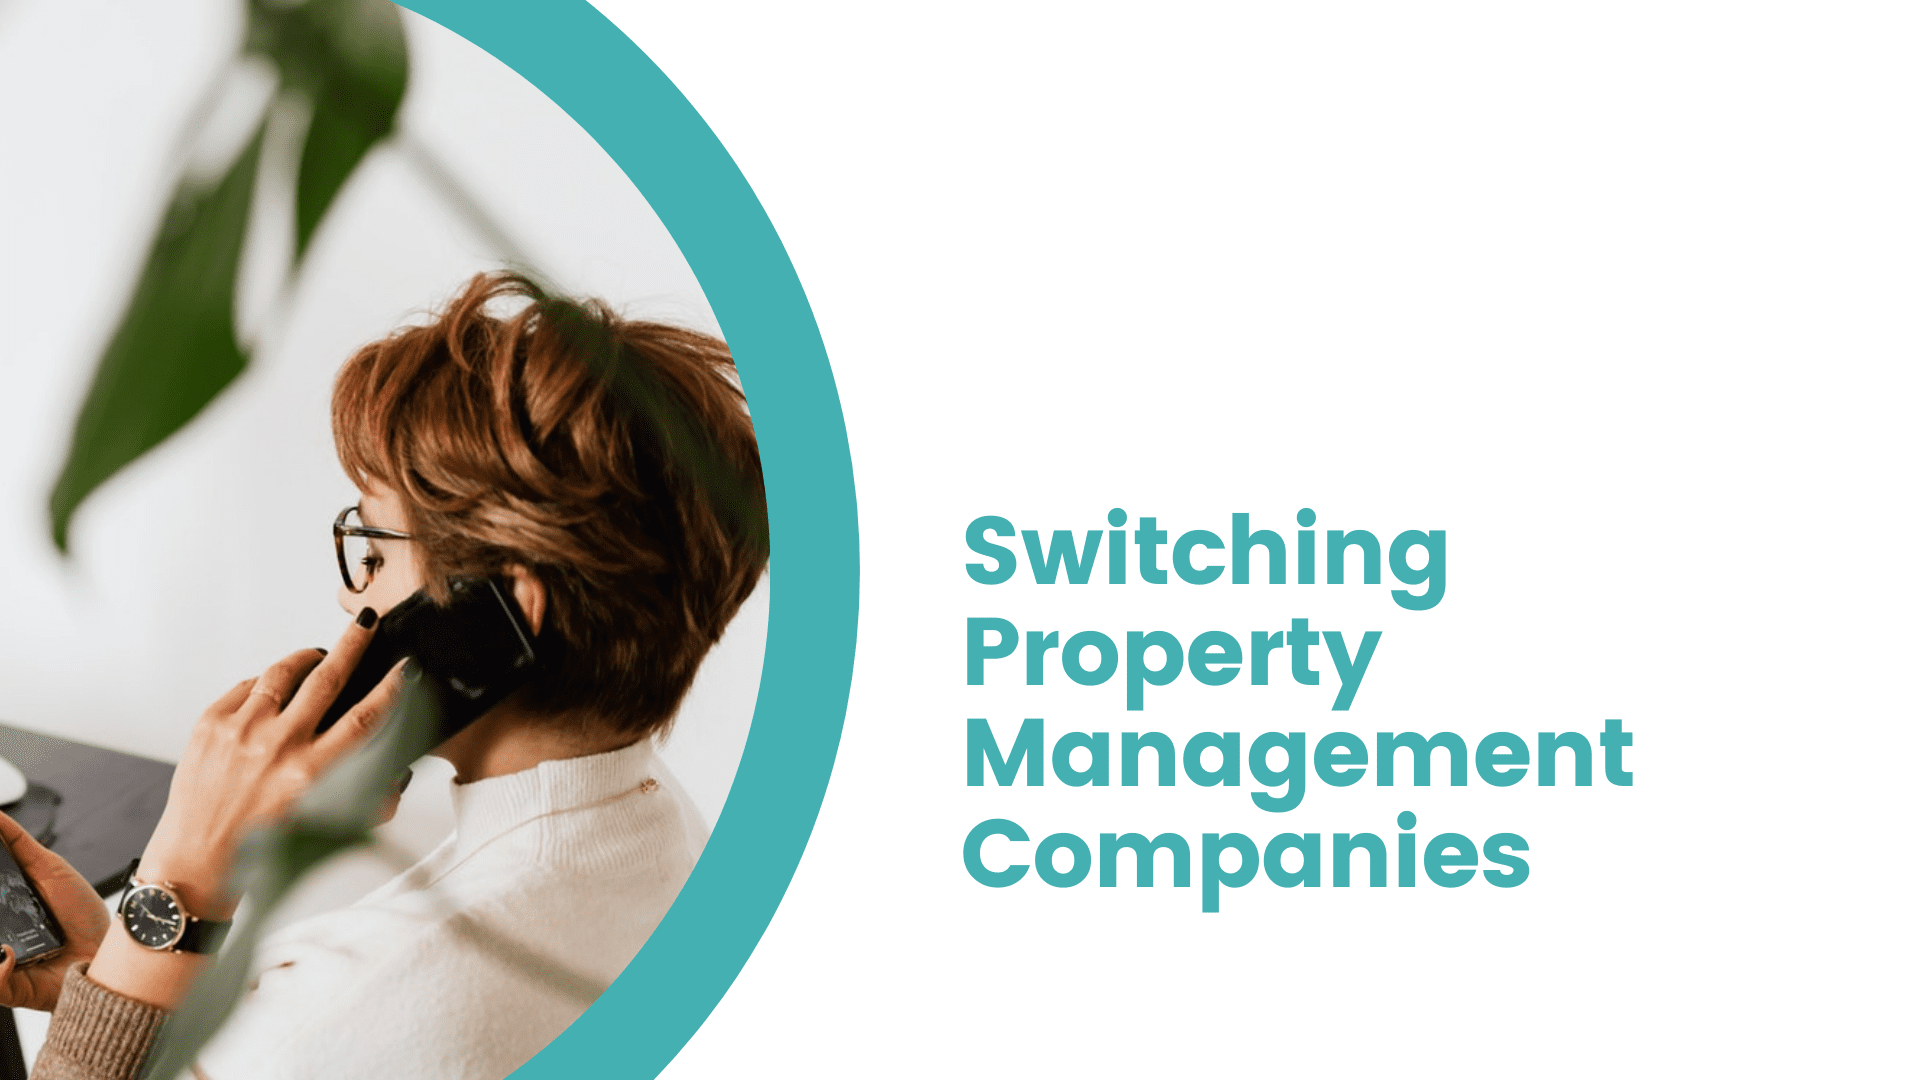 How to Know When it’s Time to Switch Bradenton Property Management Companies